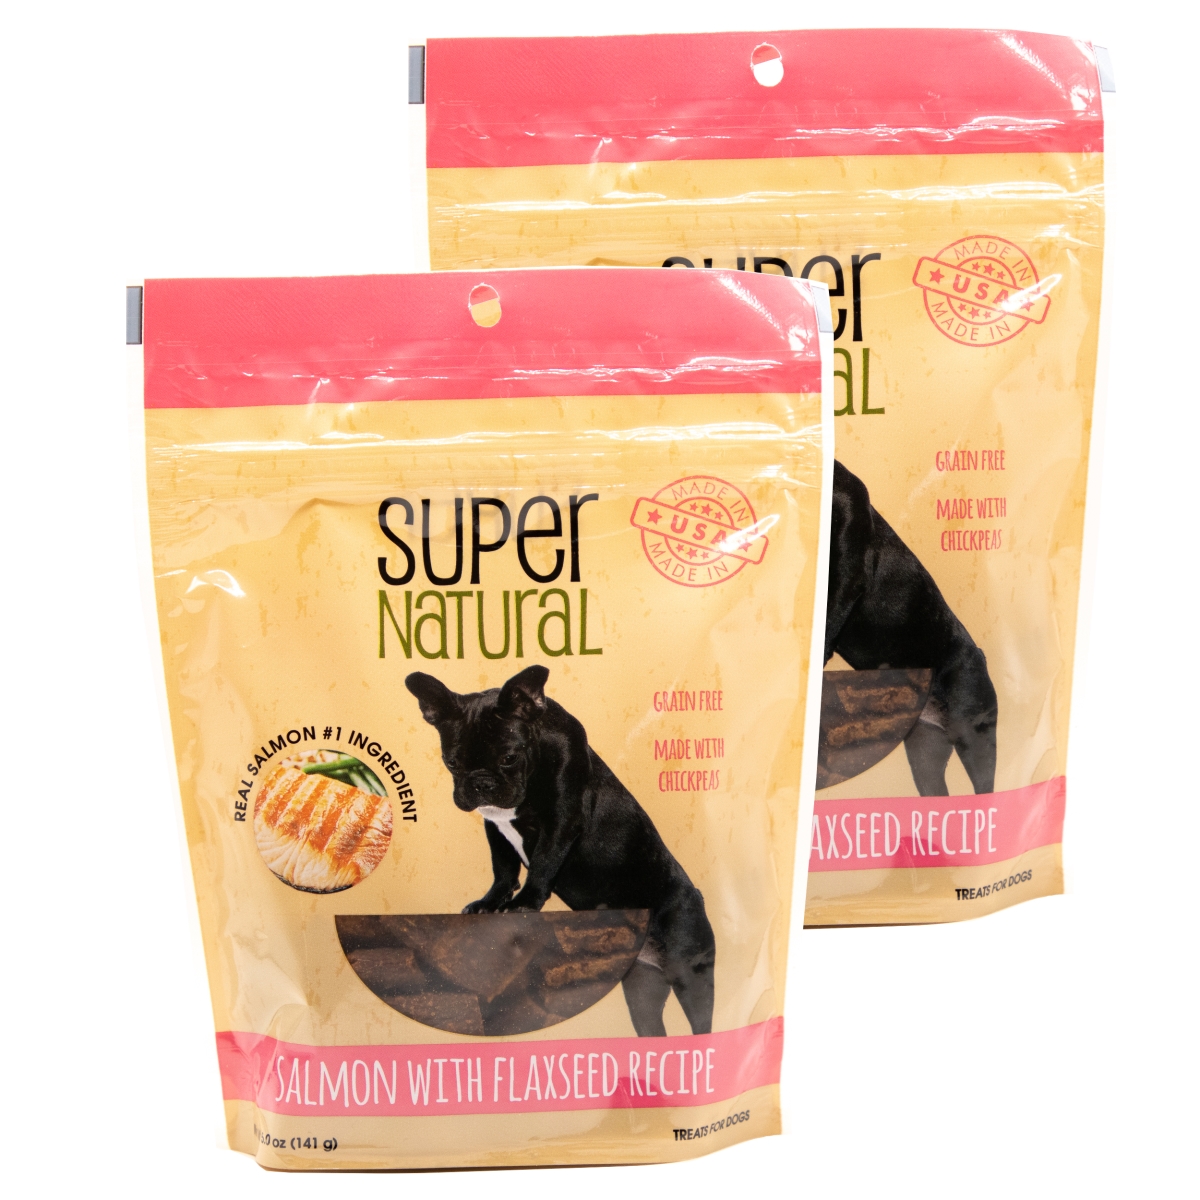 192959810066 5 Oz Salmon With Flaxseed Recipe Dog Treats - Pack Of 2